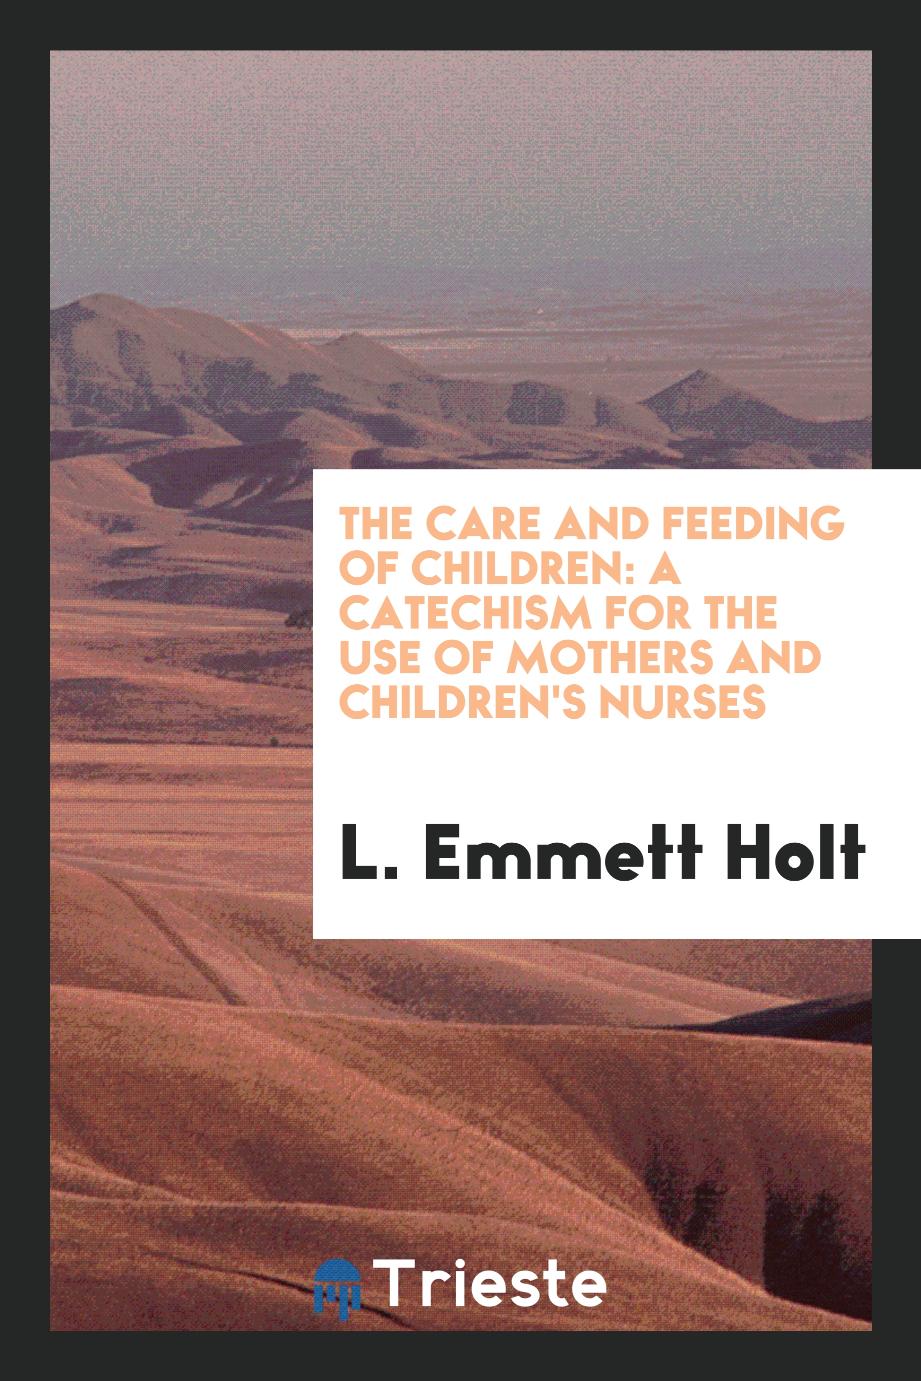 The care and feeding of children: a catechism for the use of mothers and children's nurses